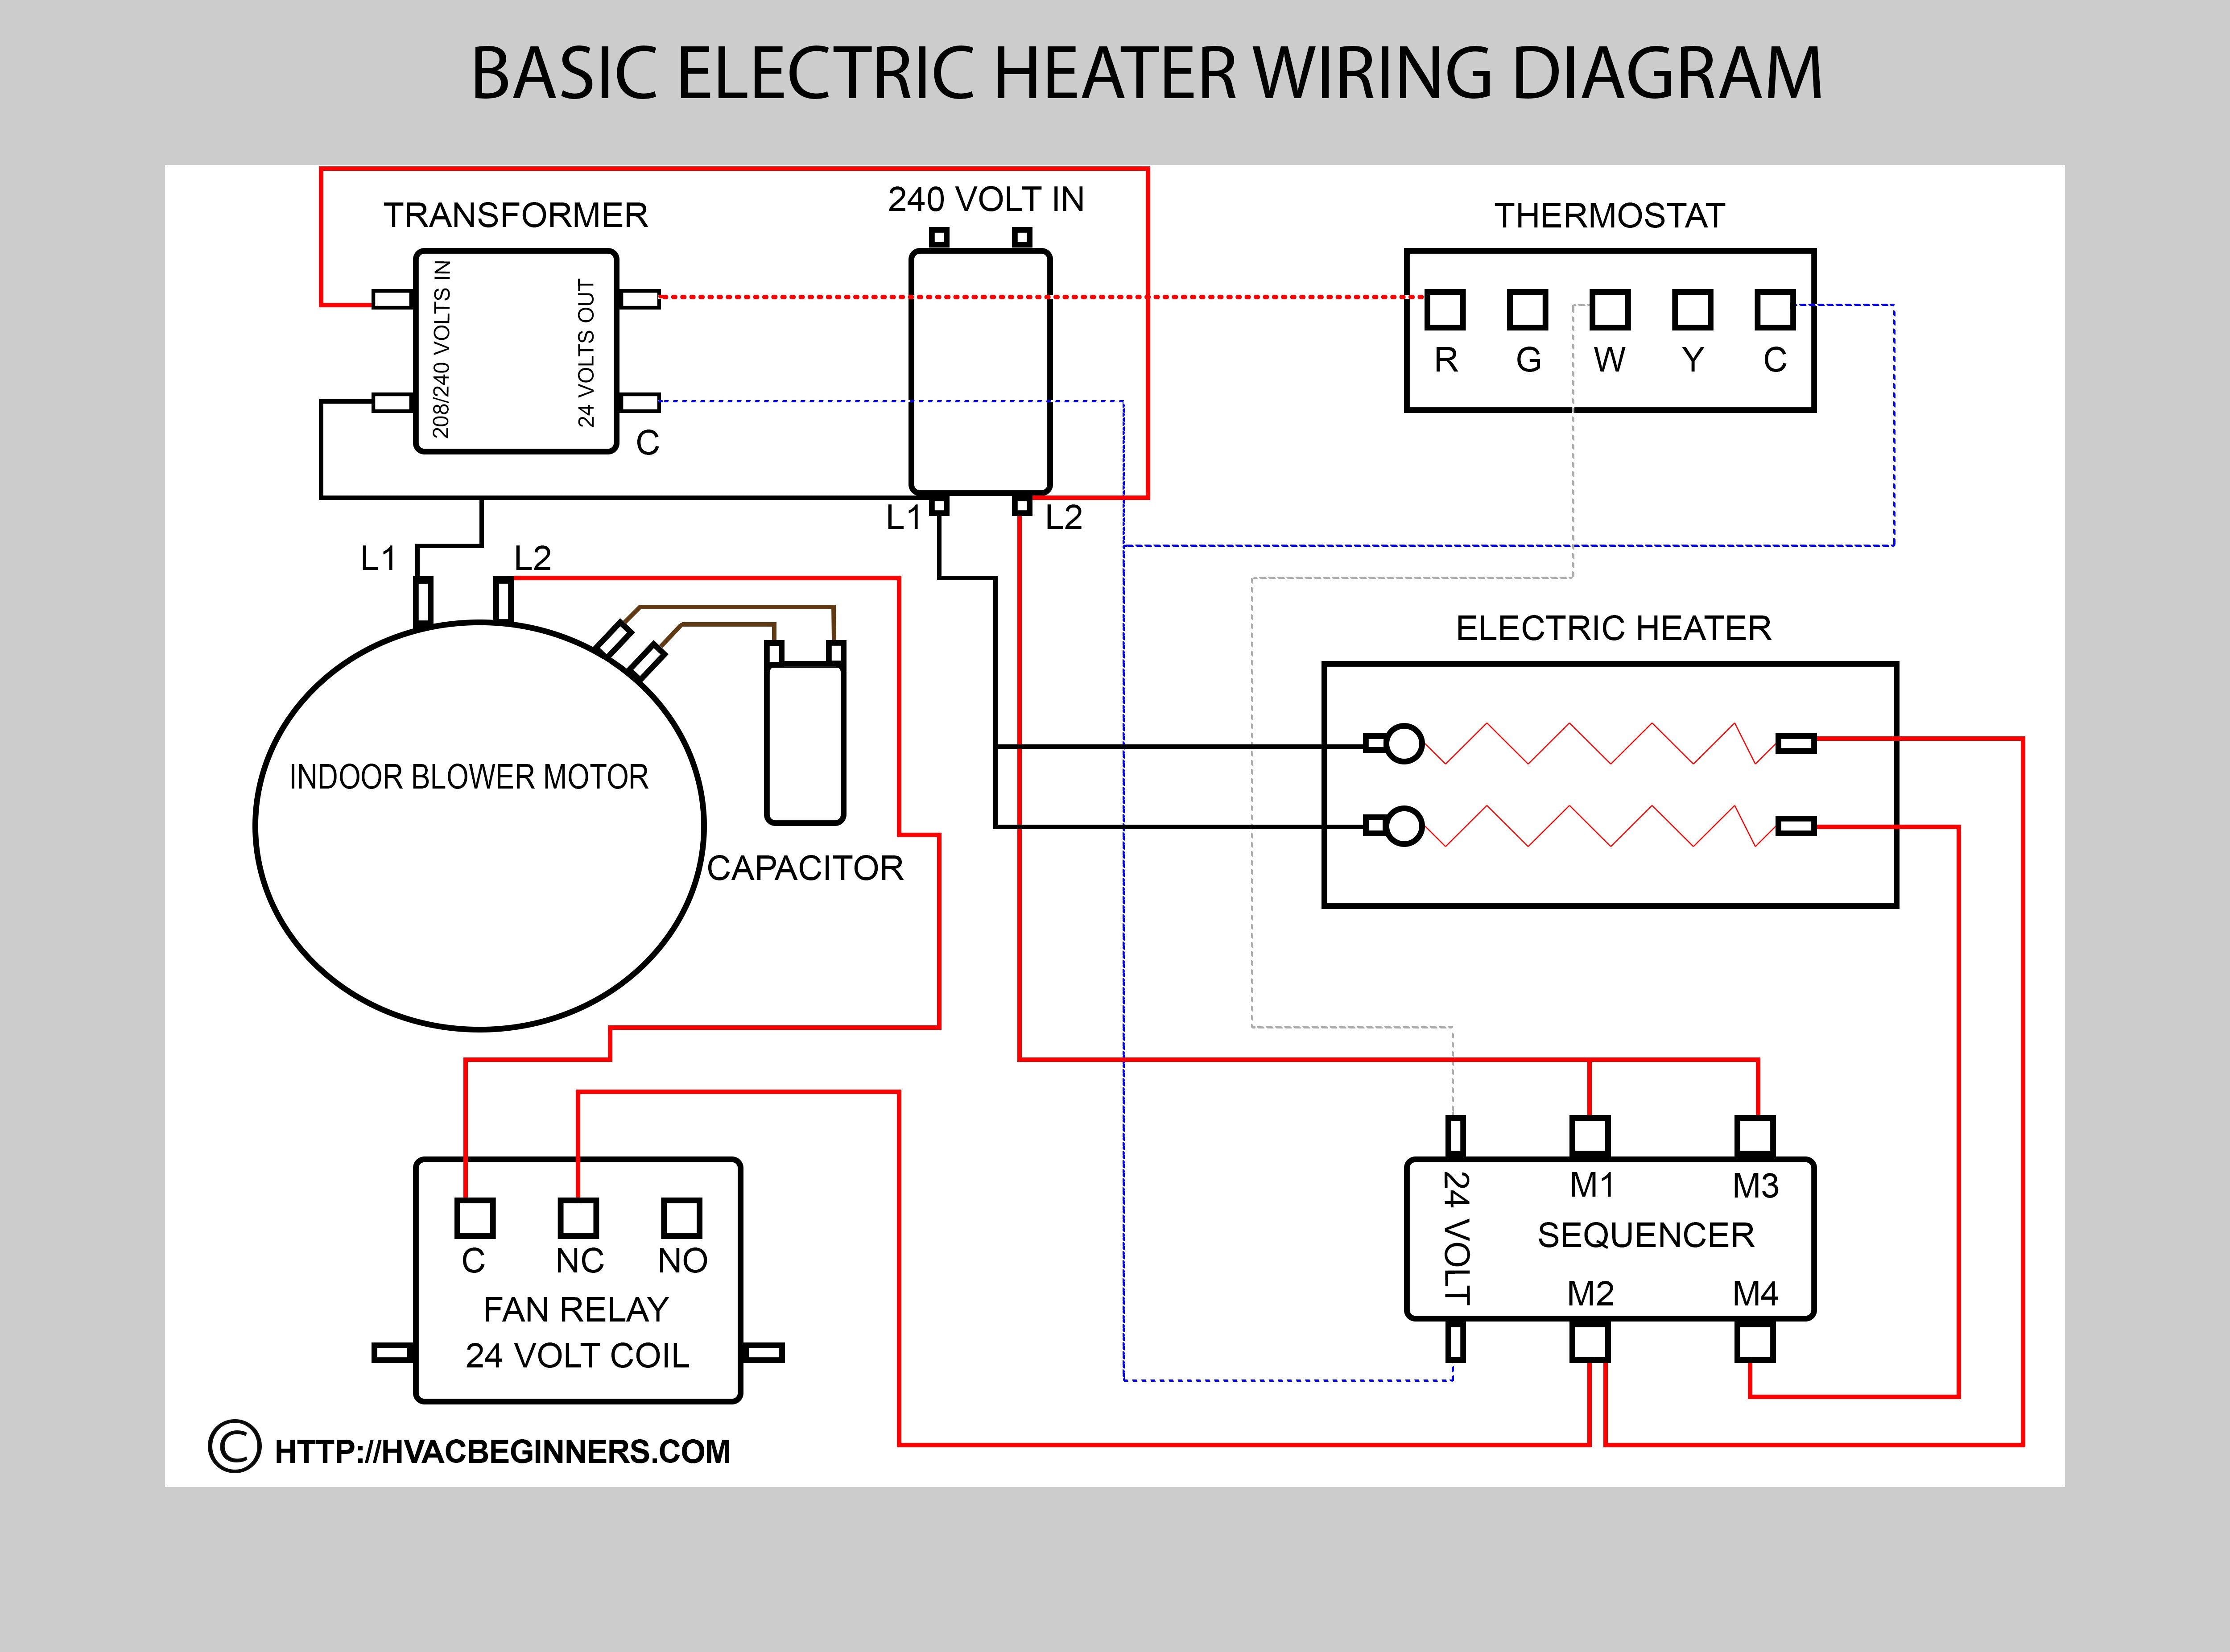 Typical Relay Wiring Diagram Refrence Split System Air Conditioner Wiring Diagram Hvac Wire Central and